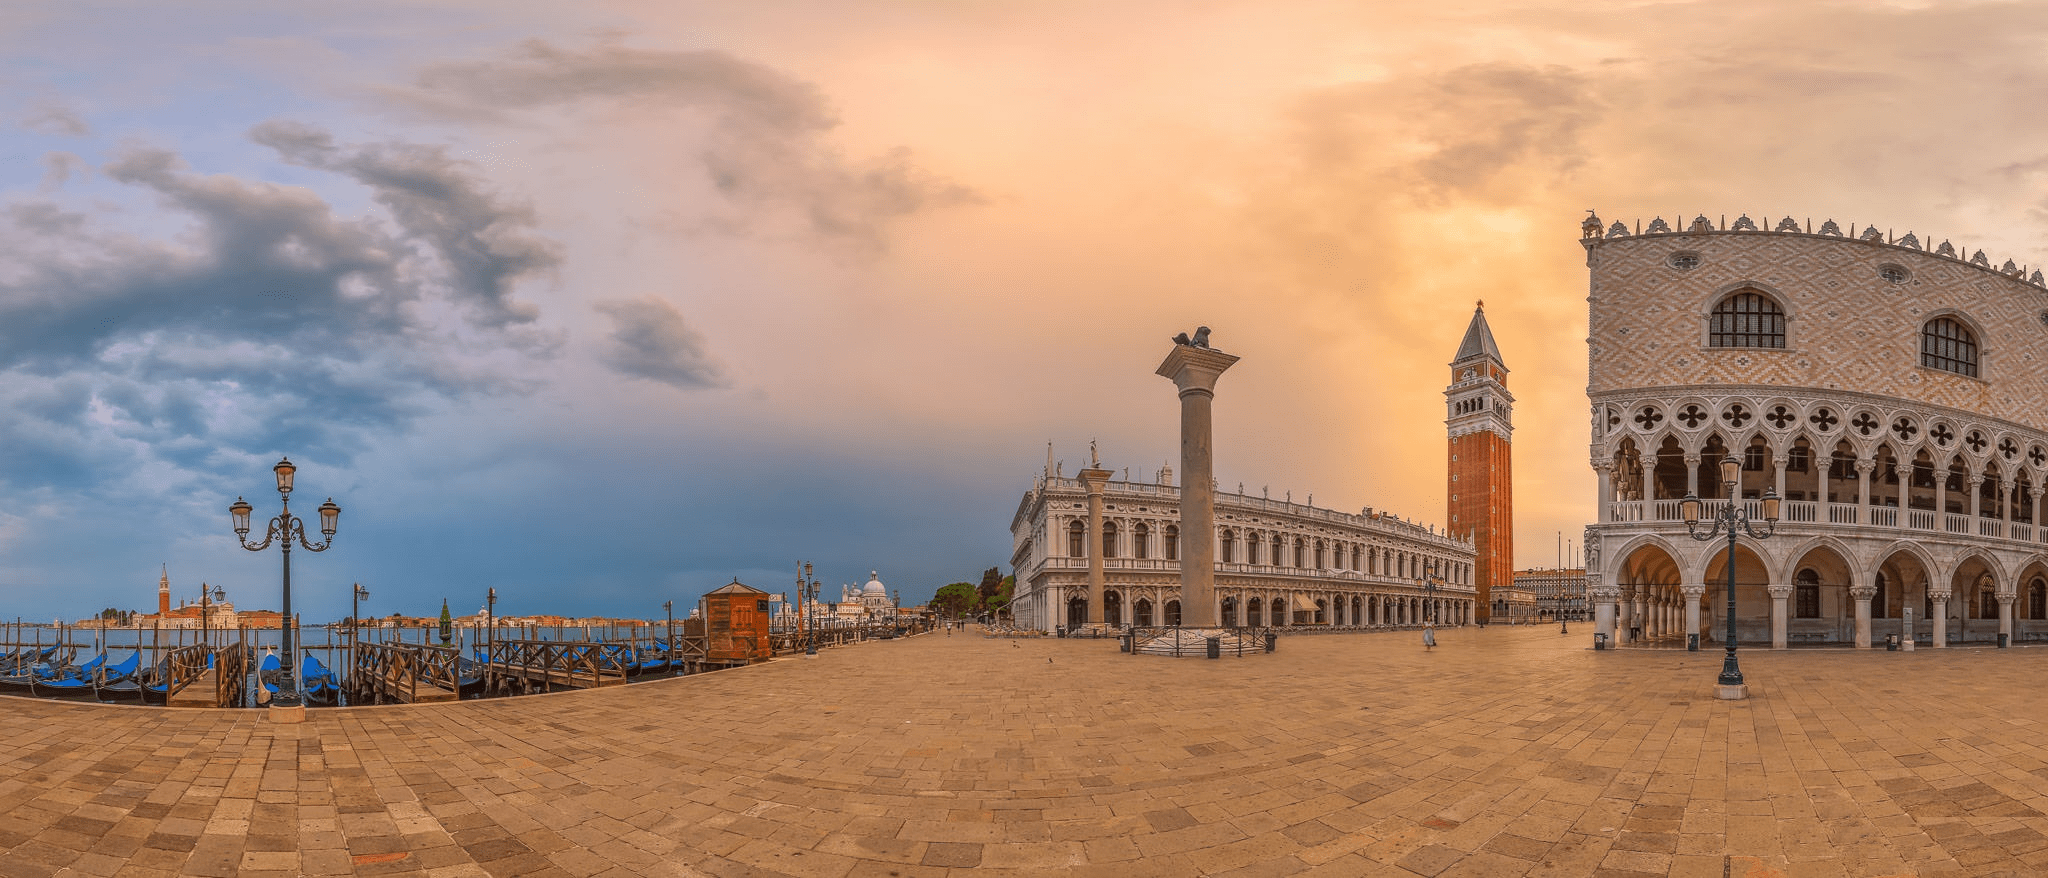 FIIGUREᵀᴹ Solutions - Virtual Piazza - Doges Palace, San Marco